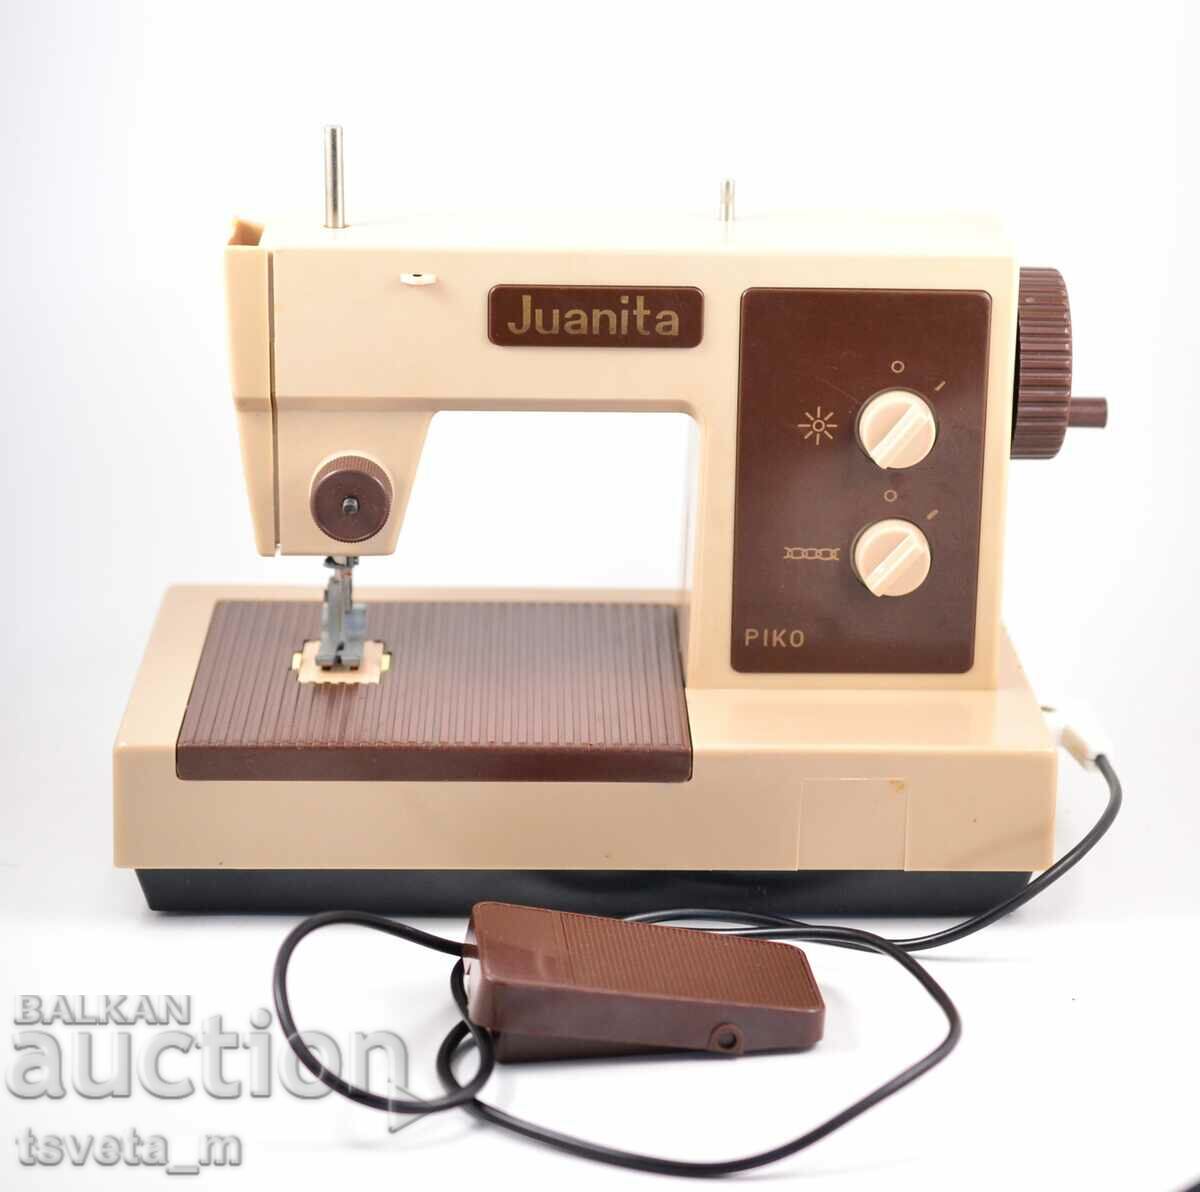 PIKO GDR sewing machine with original box children's toys social